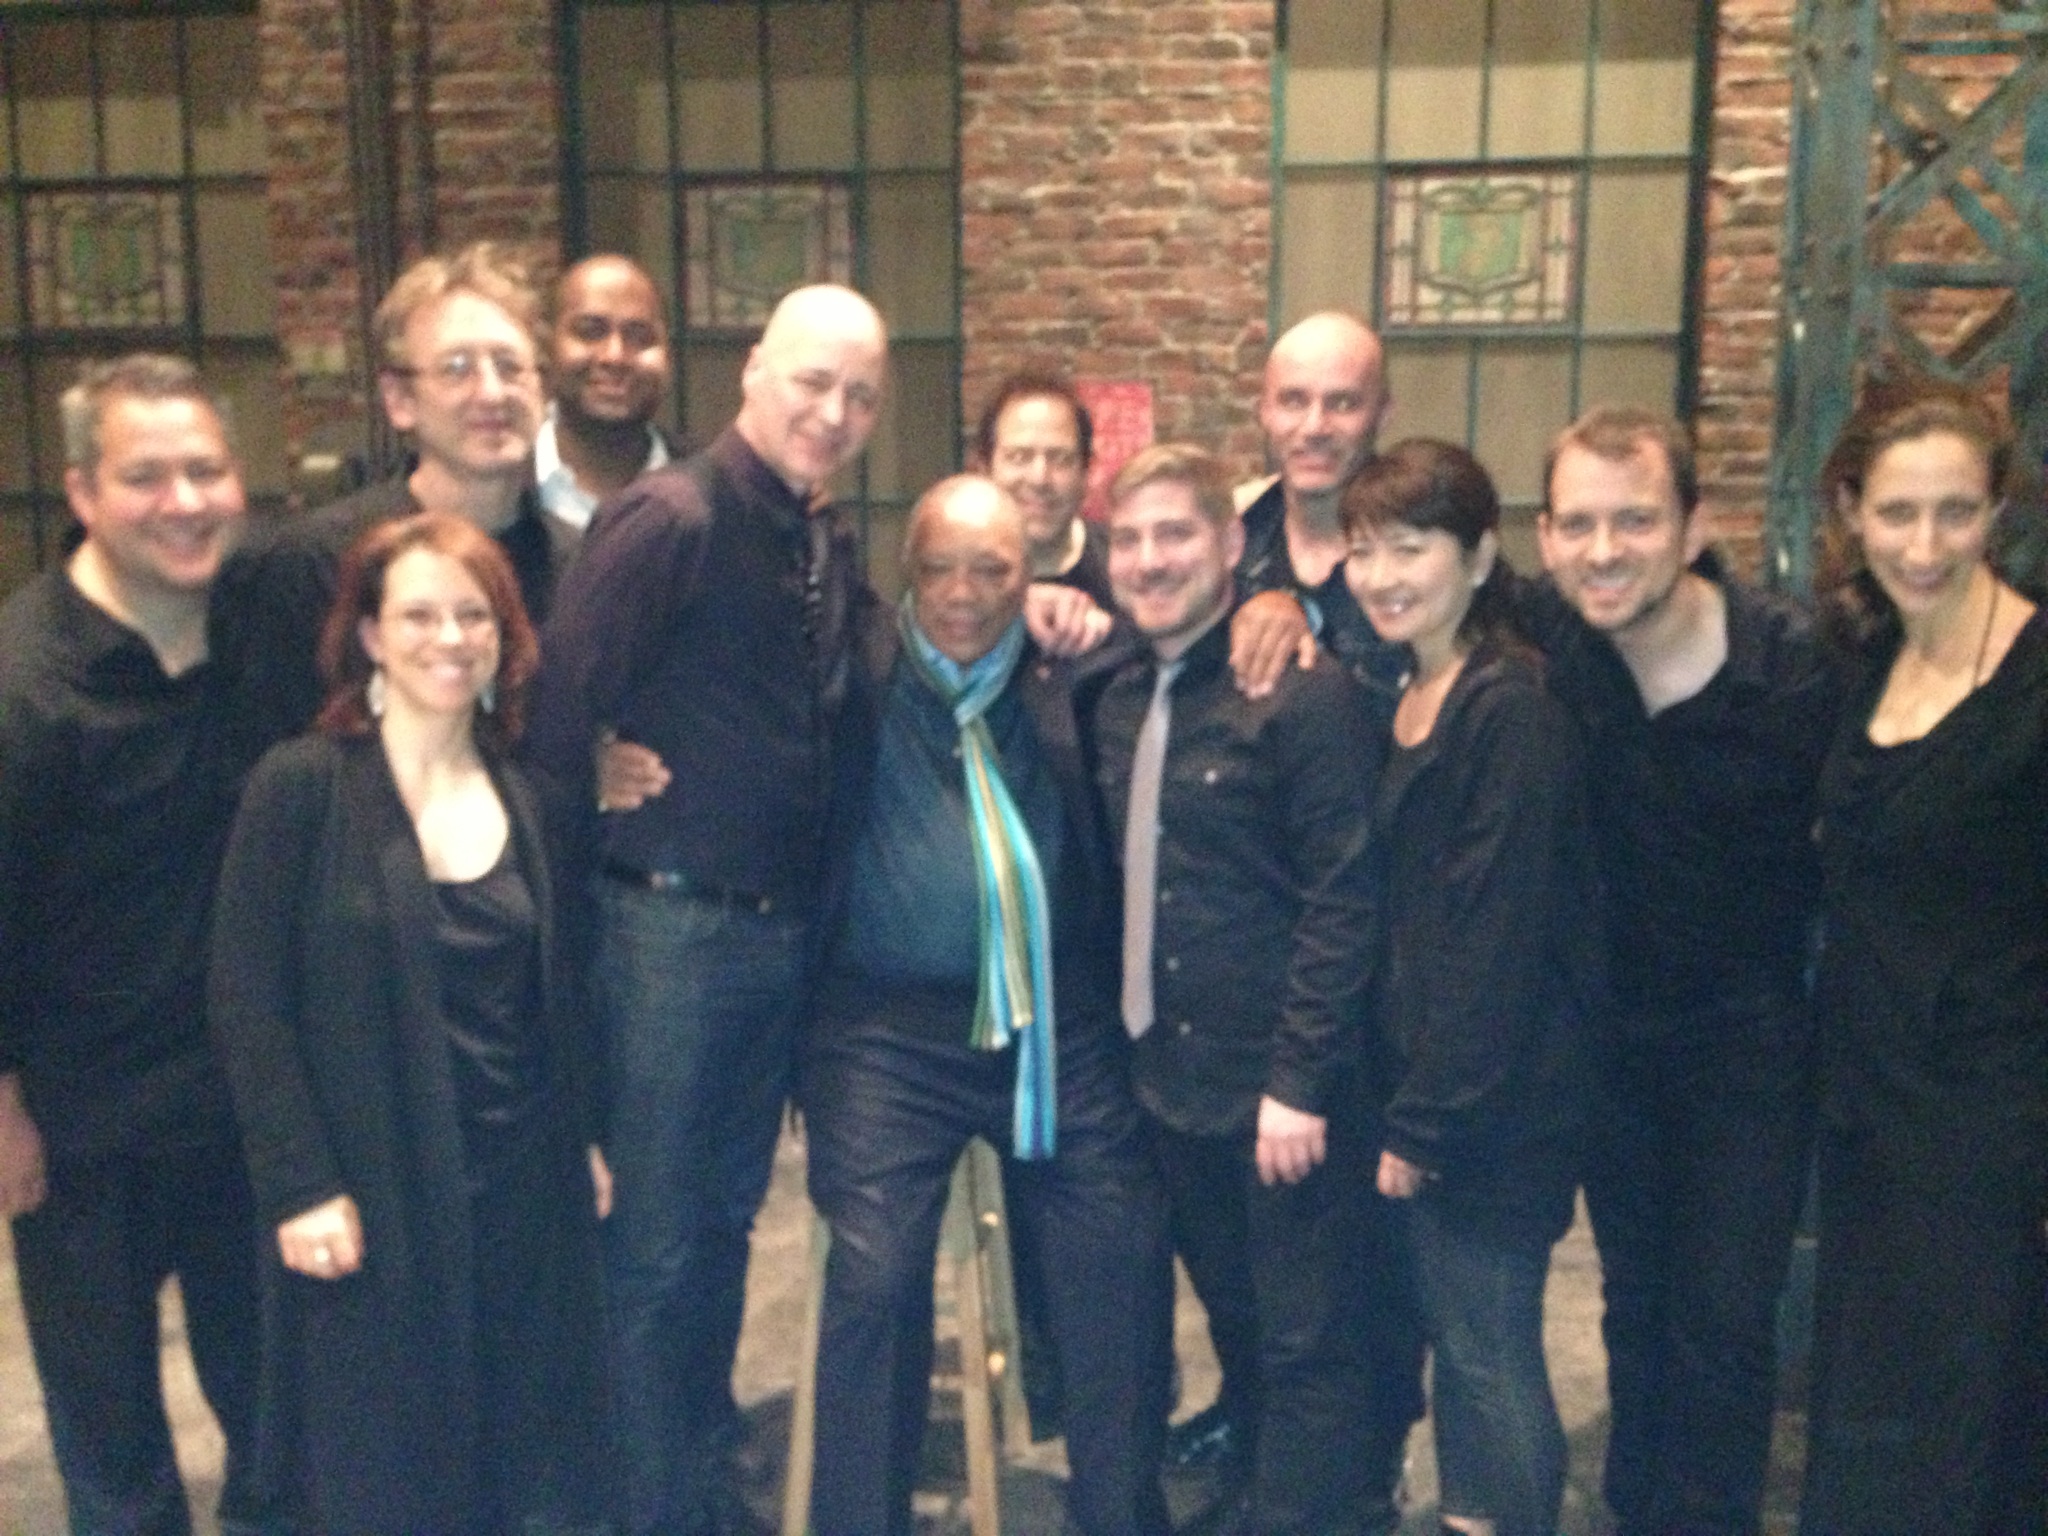 Kinky Boots band Backstage with Quincy Jones